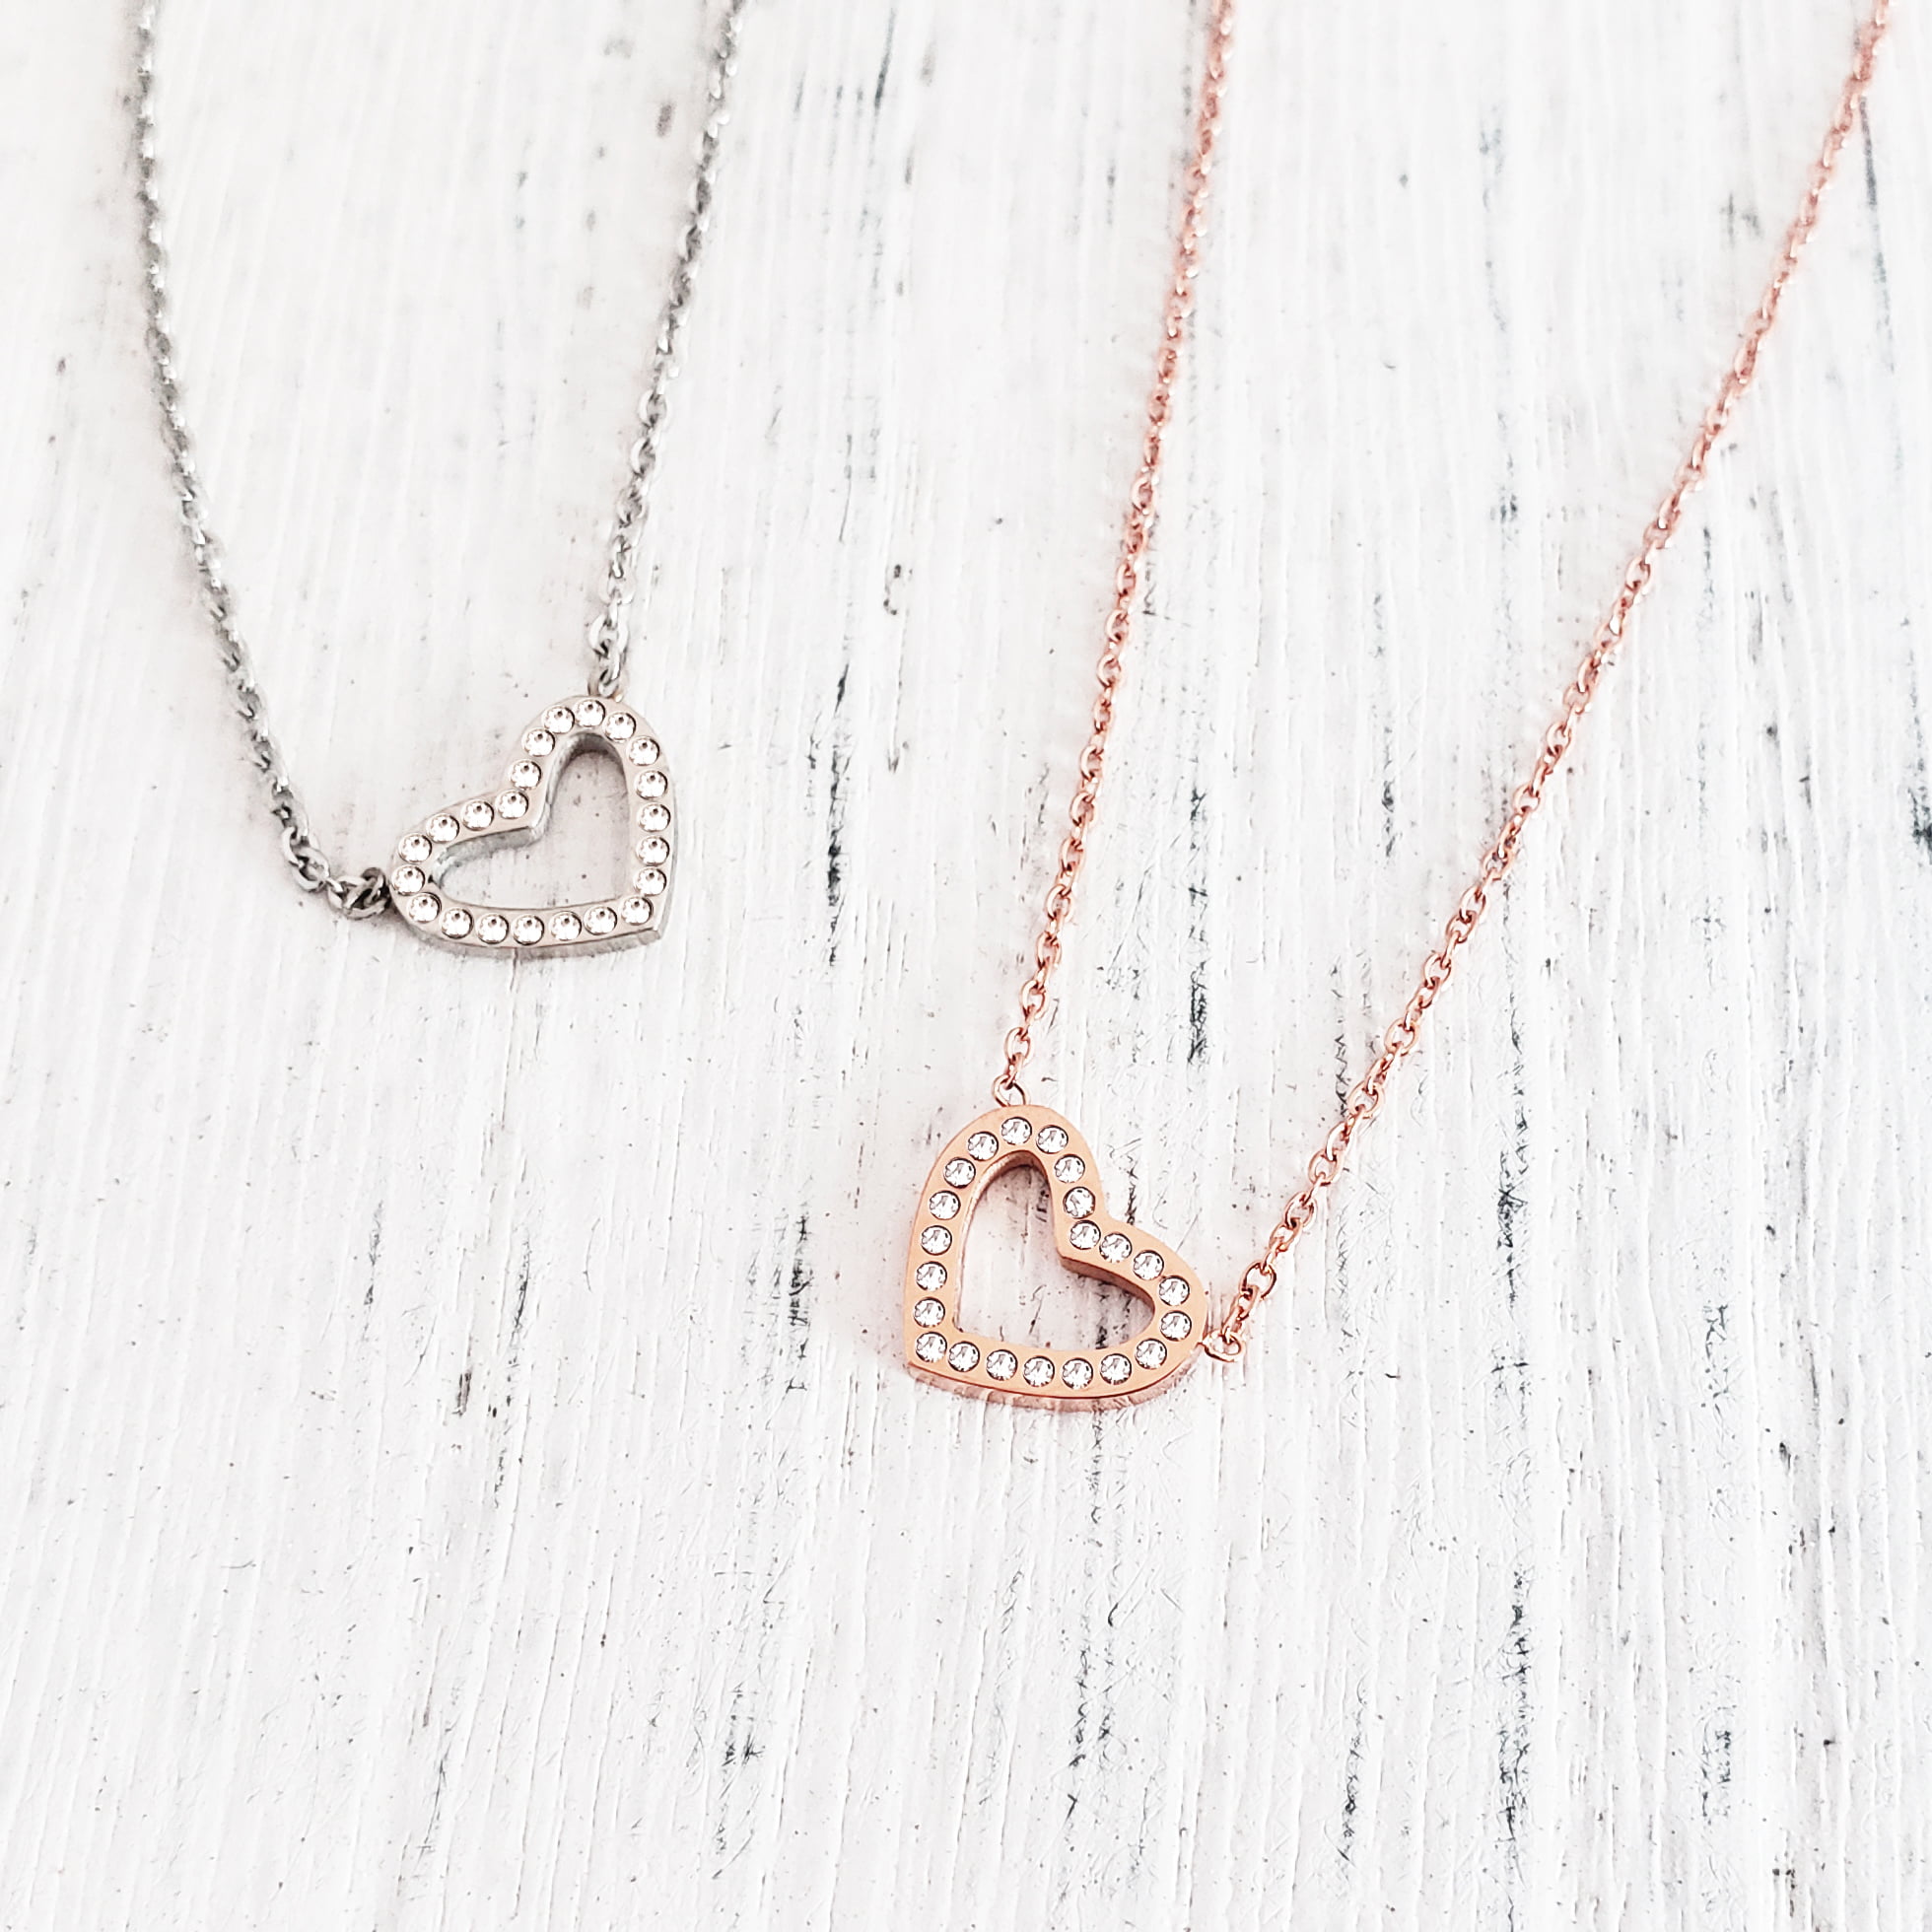 Girlfriend Heart Necklace | You And Me Always And Forever Luxury Heart  Pendant Necklace | CubeBik